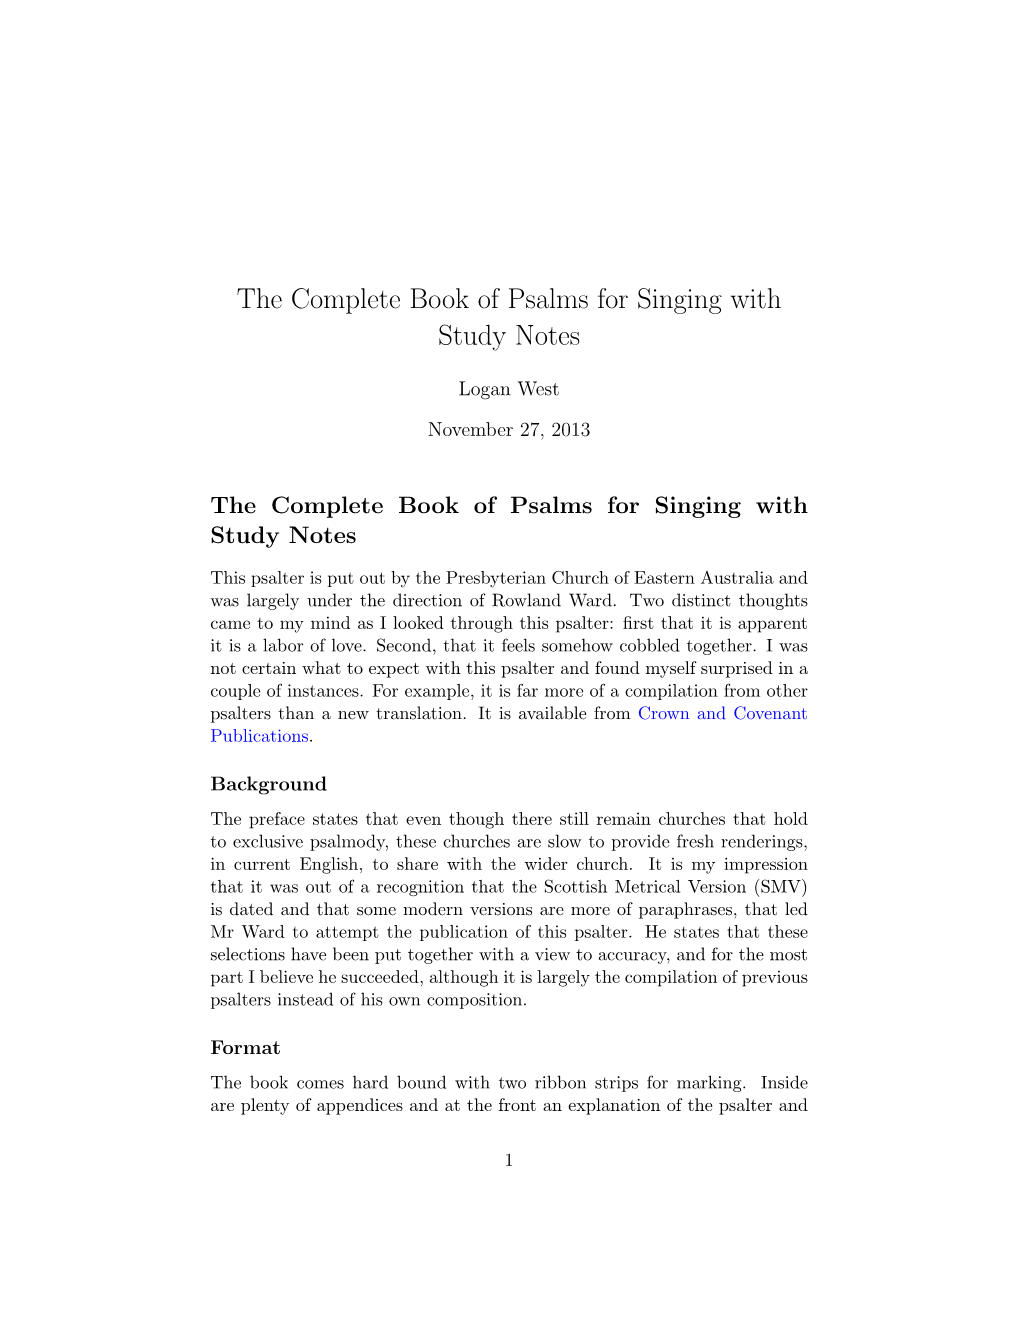 Complete Book of Psalms for Singing with Study Notes